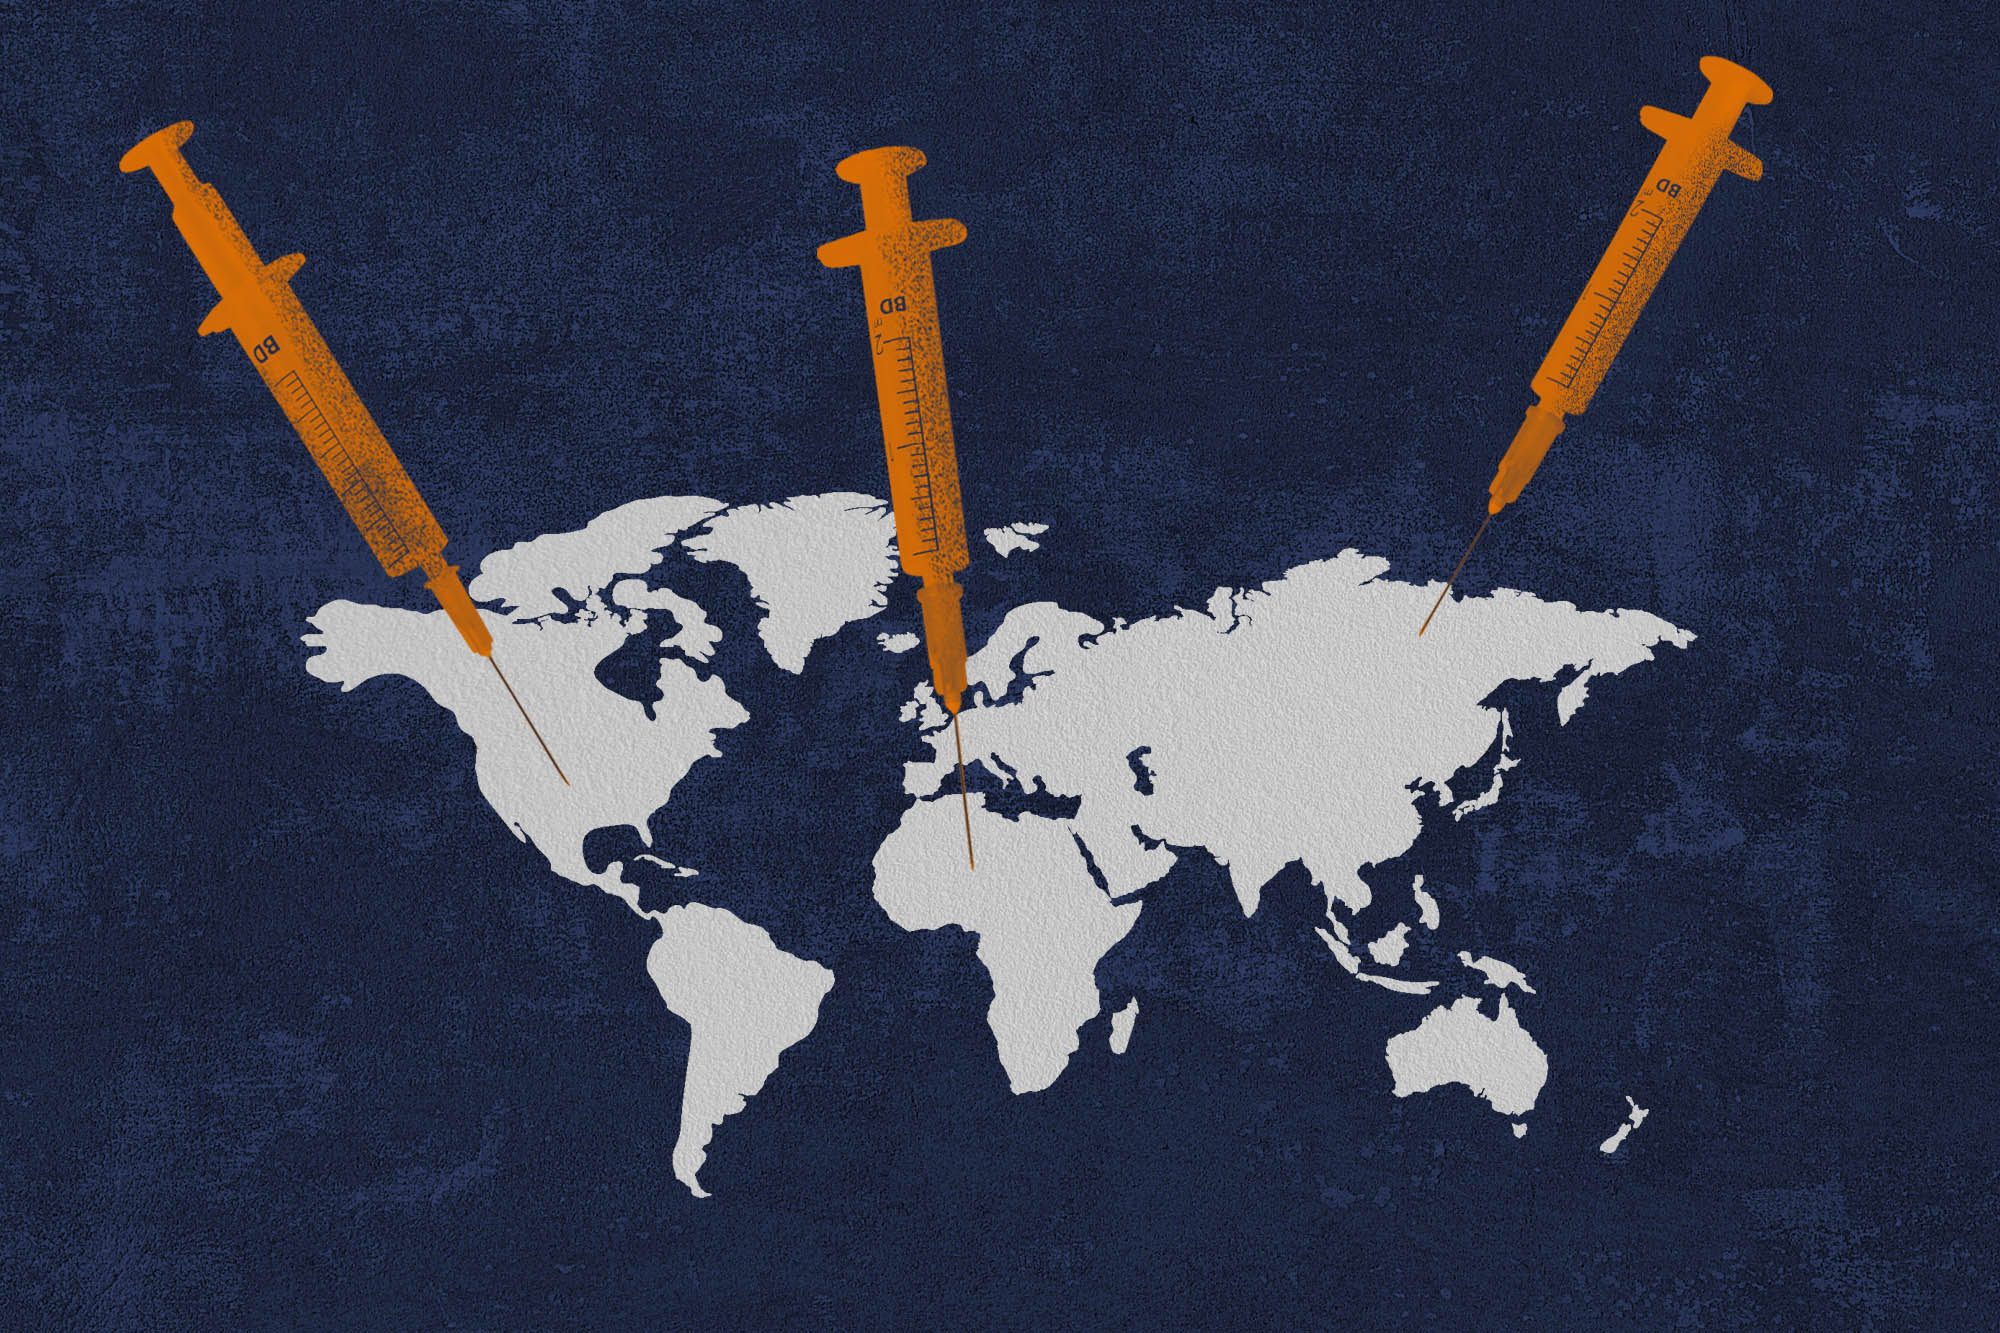 Illustration of the world with Orange syringes in different countries